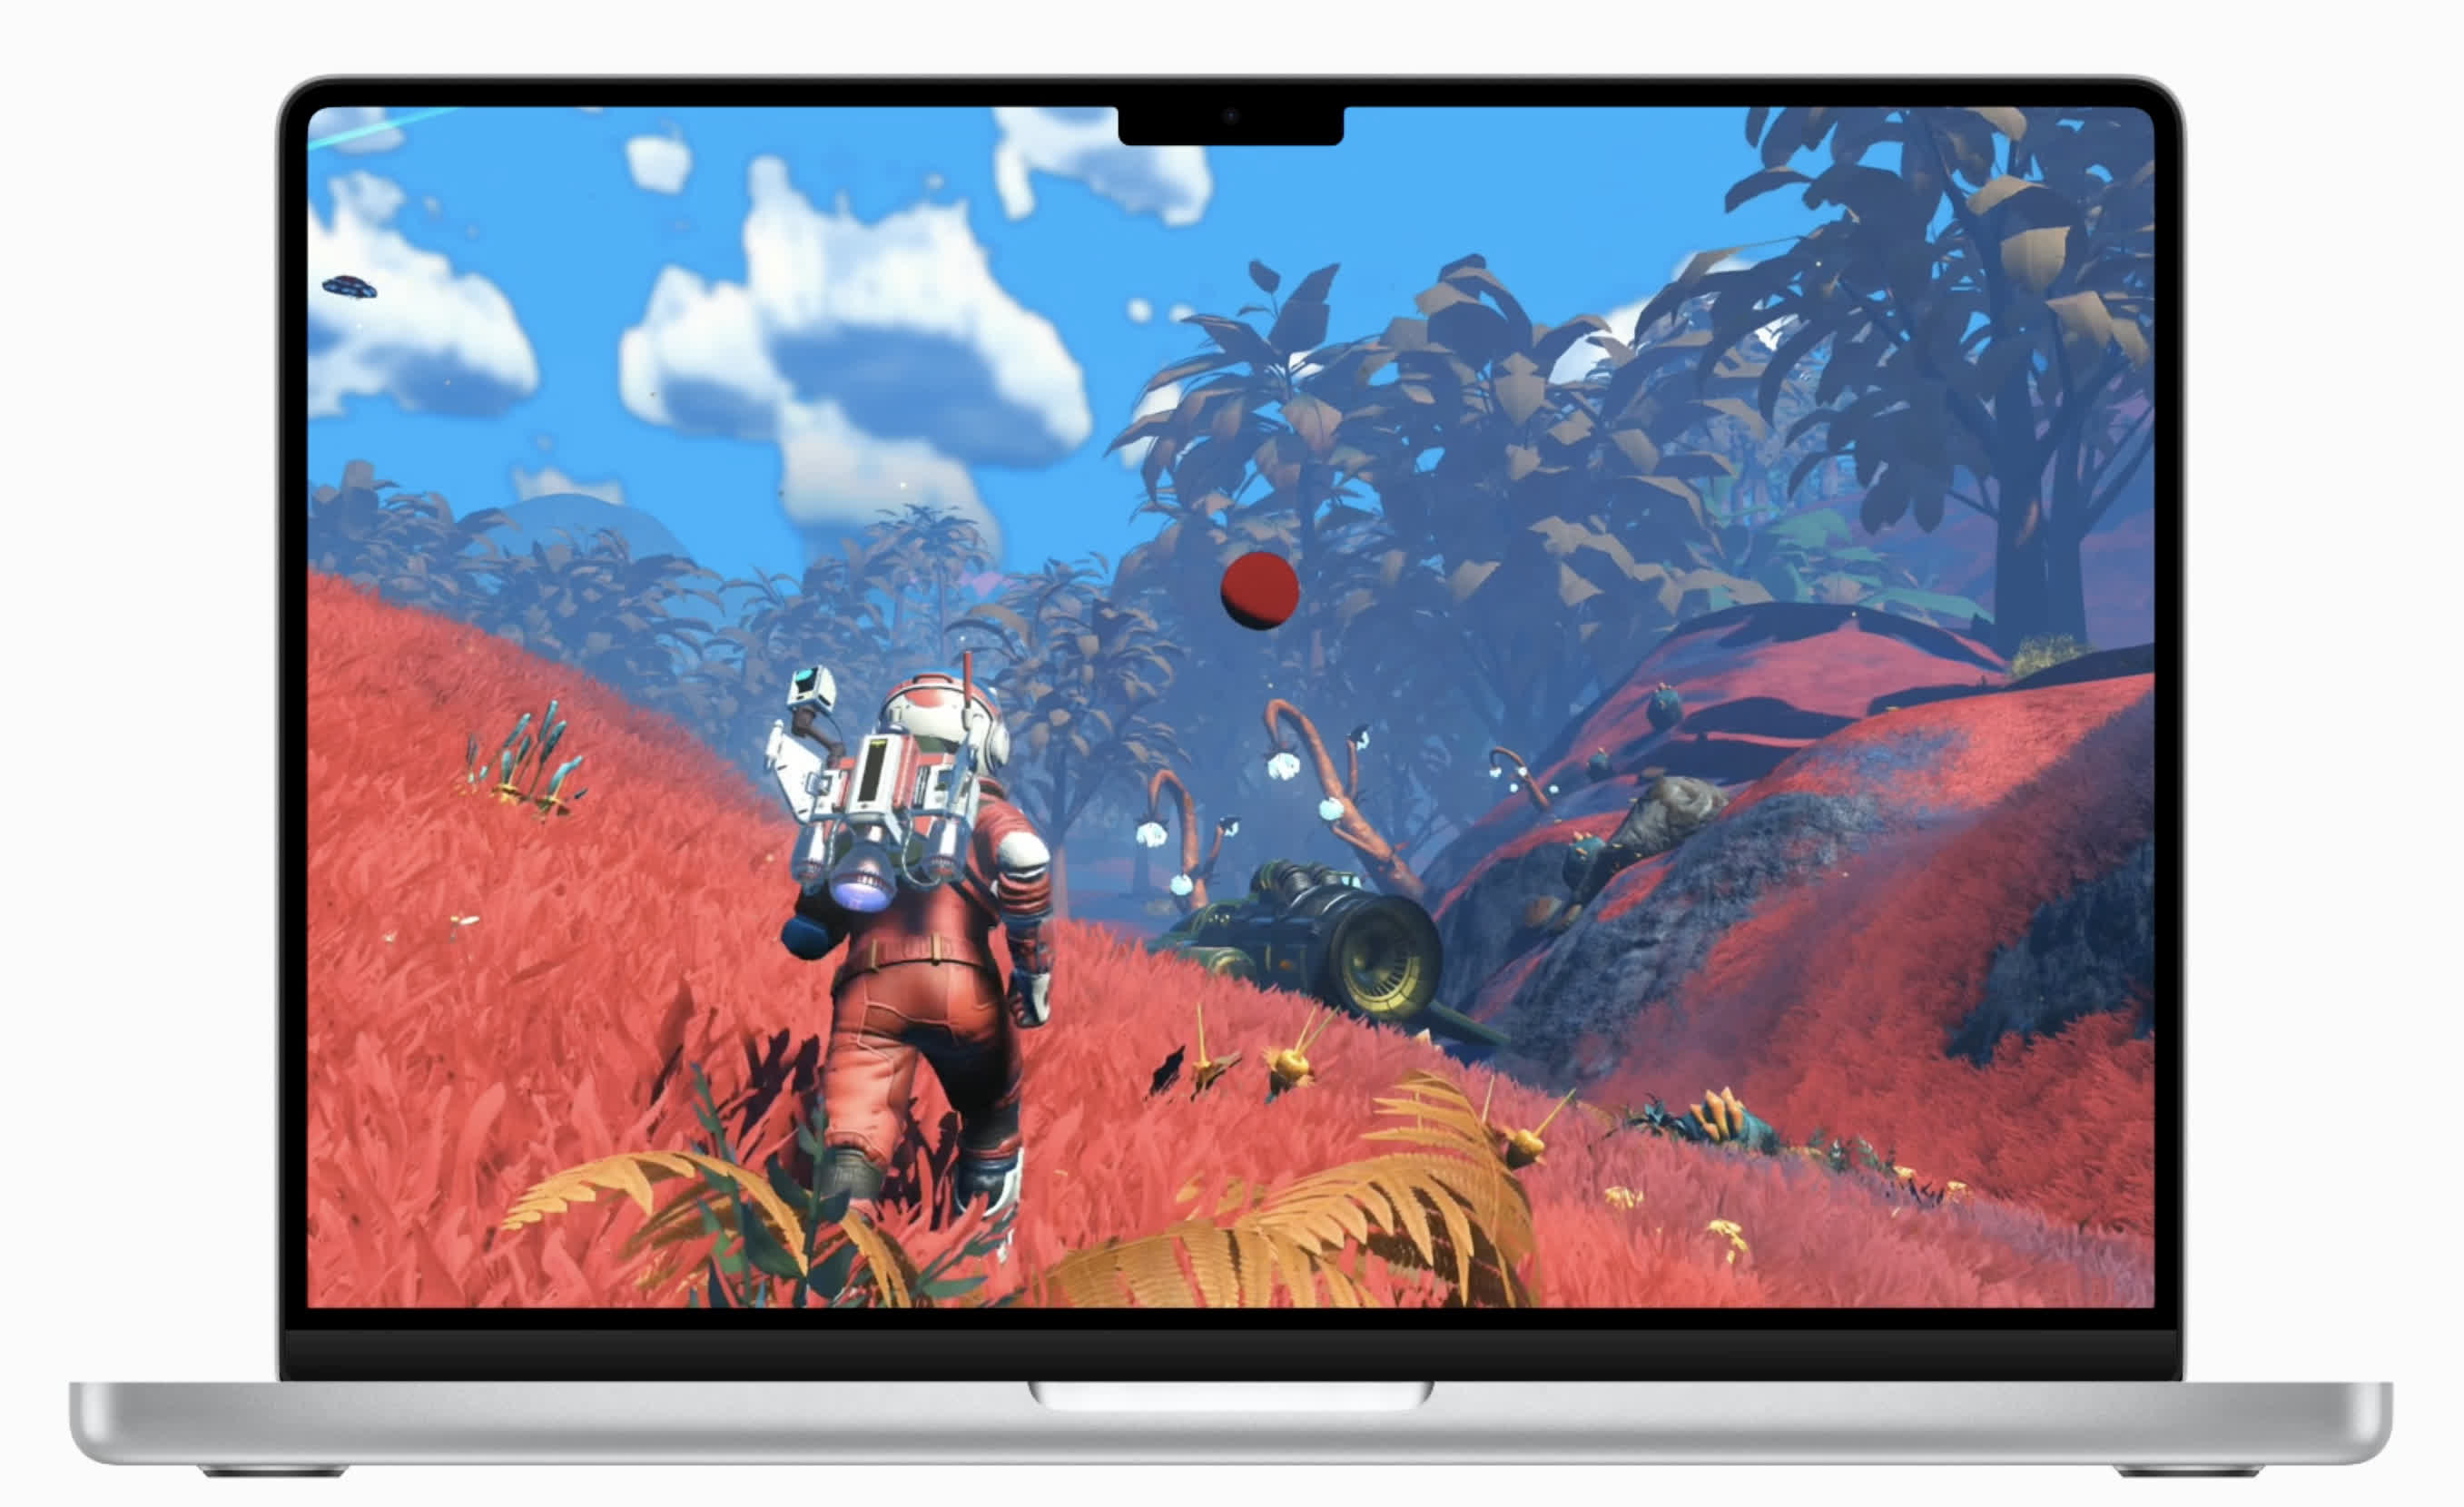 Apple wants to spark Mac gaming with MetalFX Upscaling tech